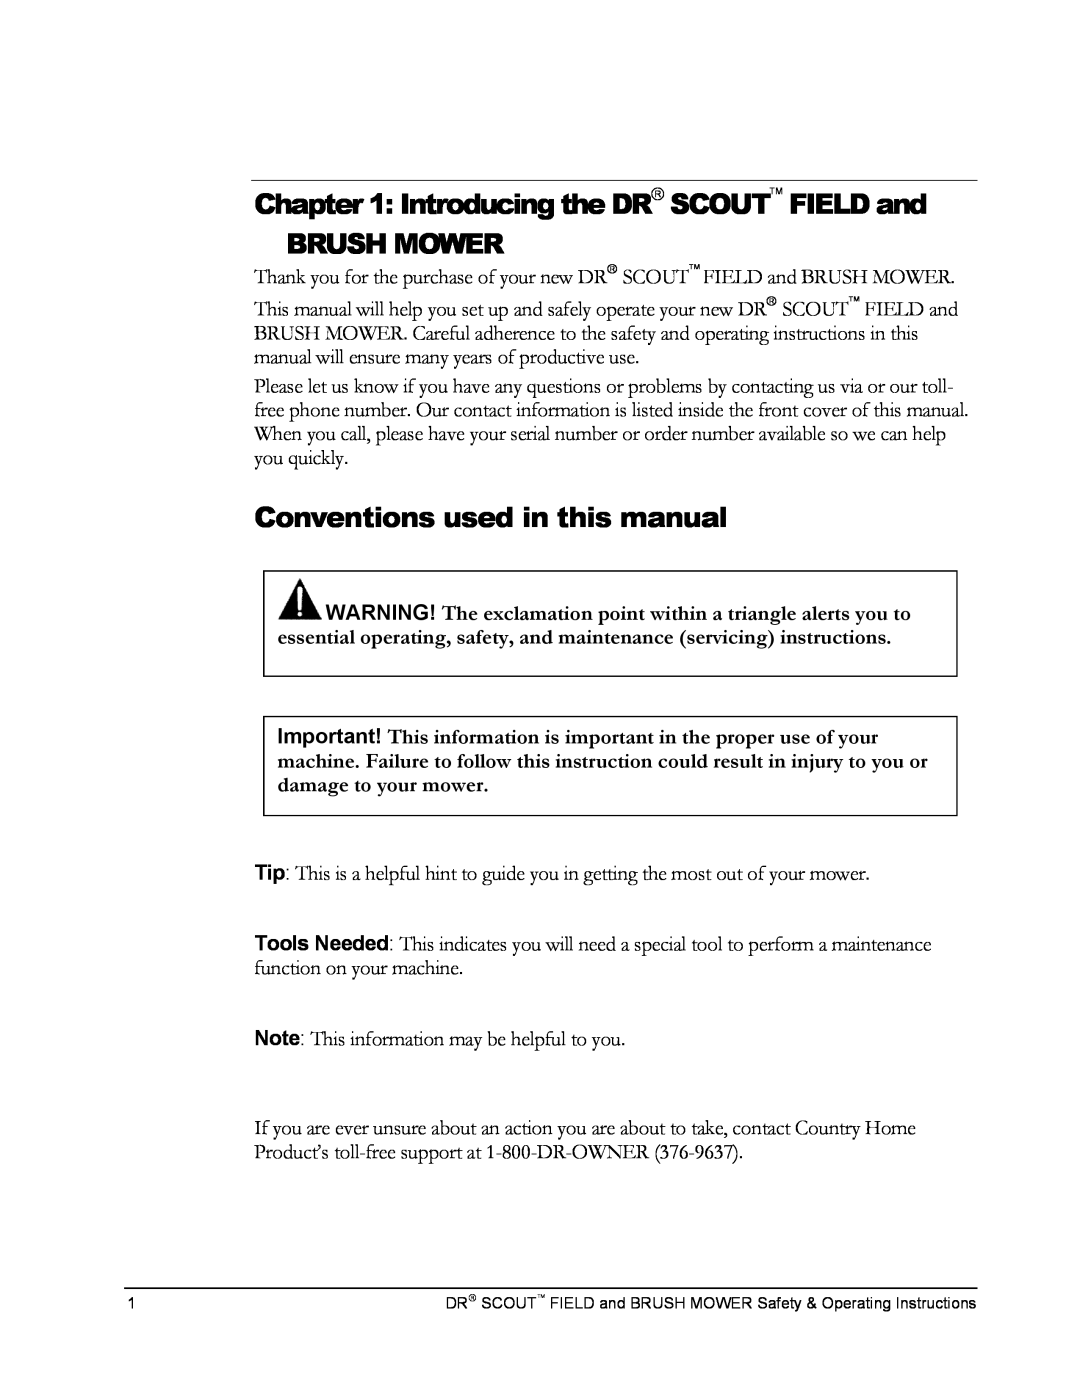 Country Home Products DR SCOUT FIELD and BRUSH MOWER manual Introducing the DR SCOUT FIELD and BRUSH MOWER 